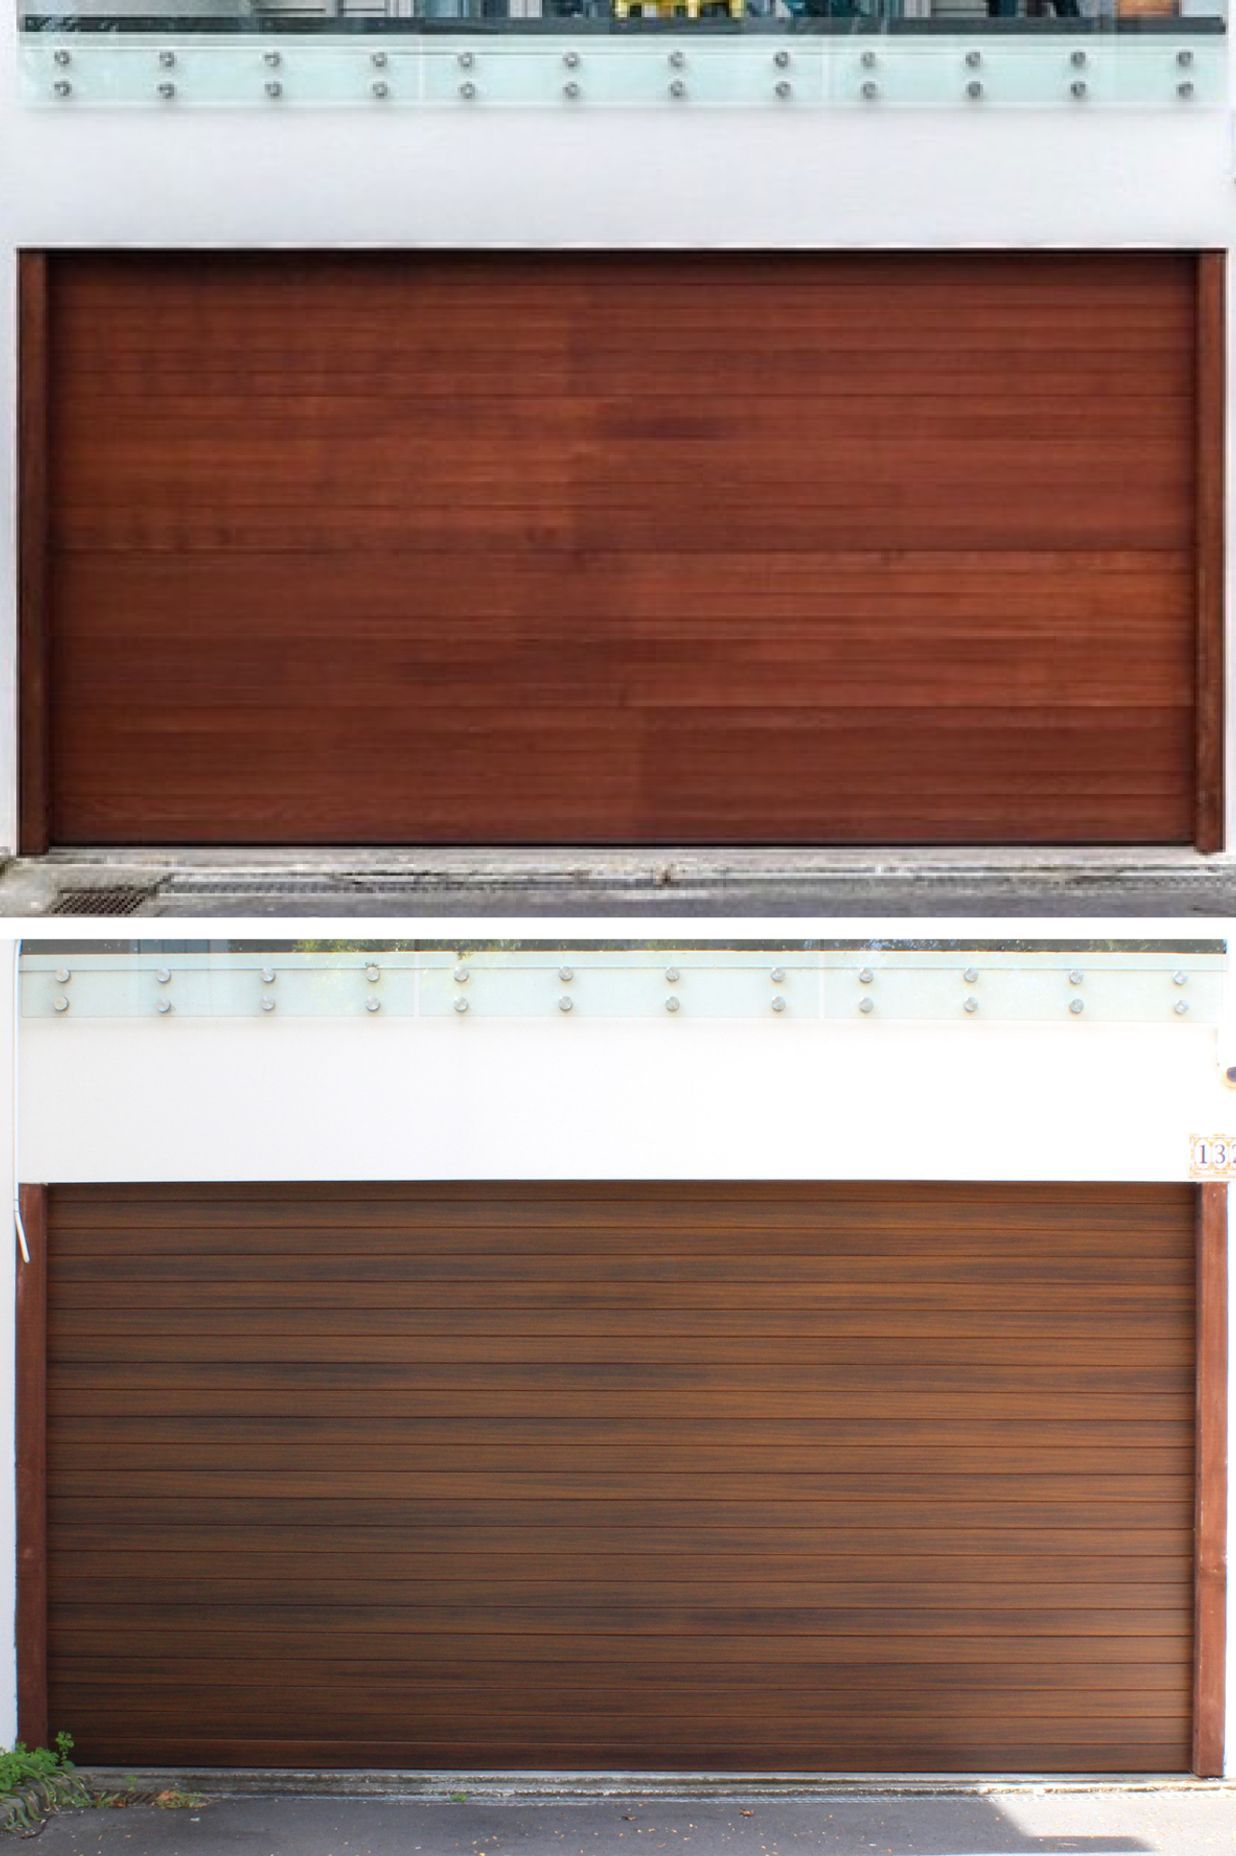 Same project, different doors: the top image shows the original natural cedar door, which has been stained and requires ongoing maintenance every 2—3 years. The bottom image is the timber-look aluminium door, which requires no ongoing maintenance.